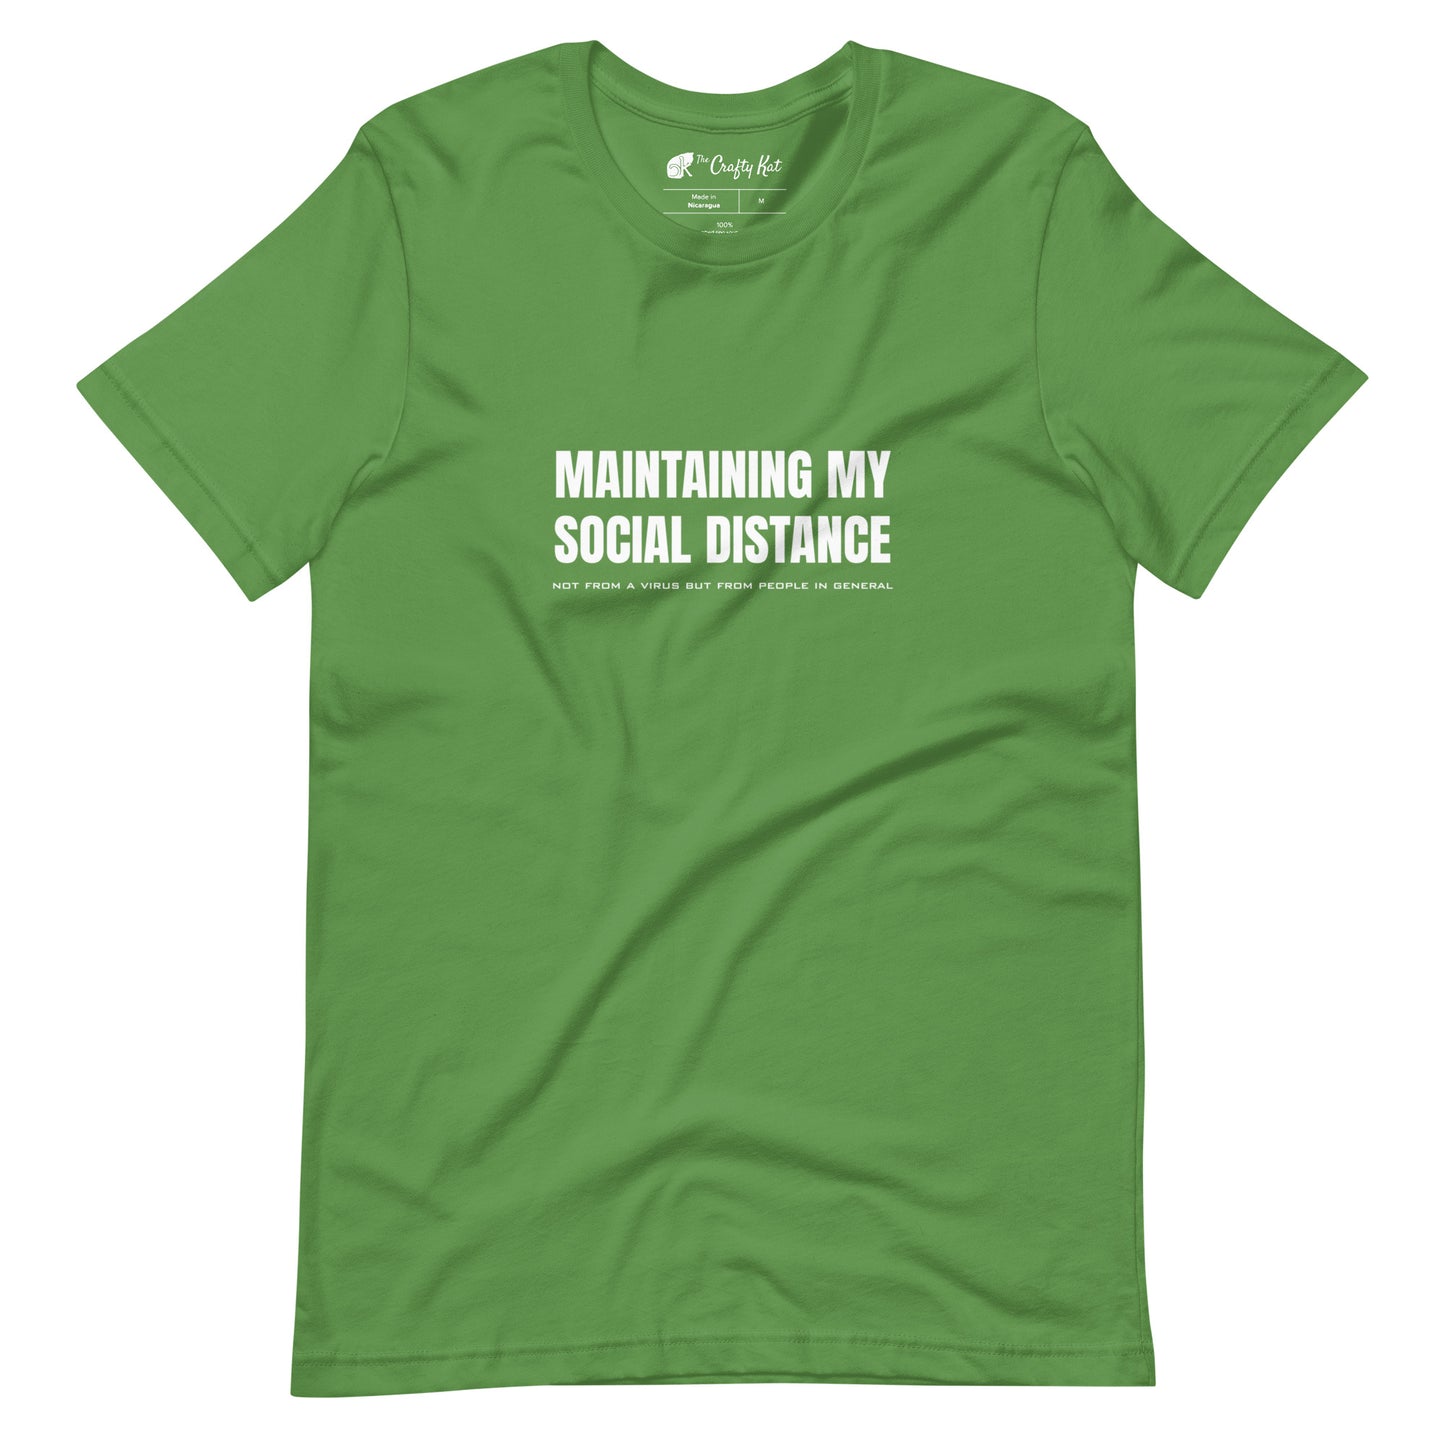 Leaf green t-shirt with white graphic: "MAINTAINING MY SOCIAL DISTANCE not from a virus but from people in general"